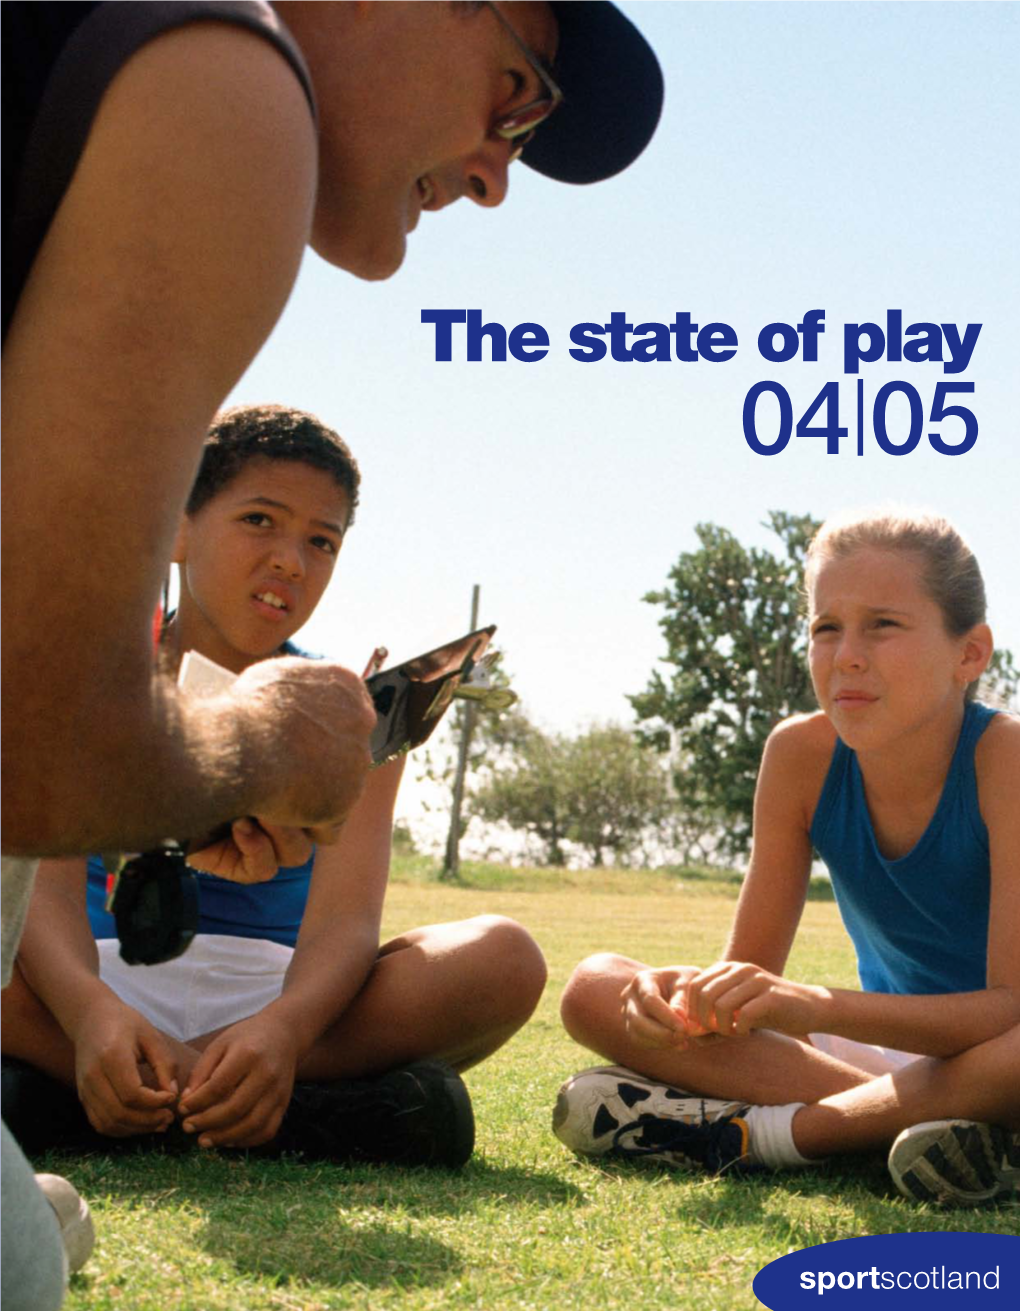 The State of Play 04|05